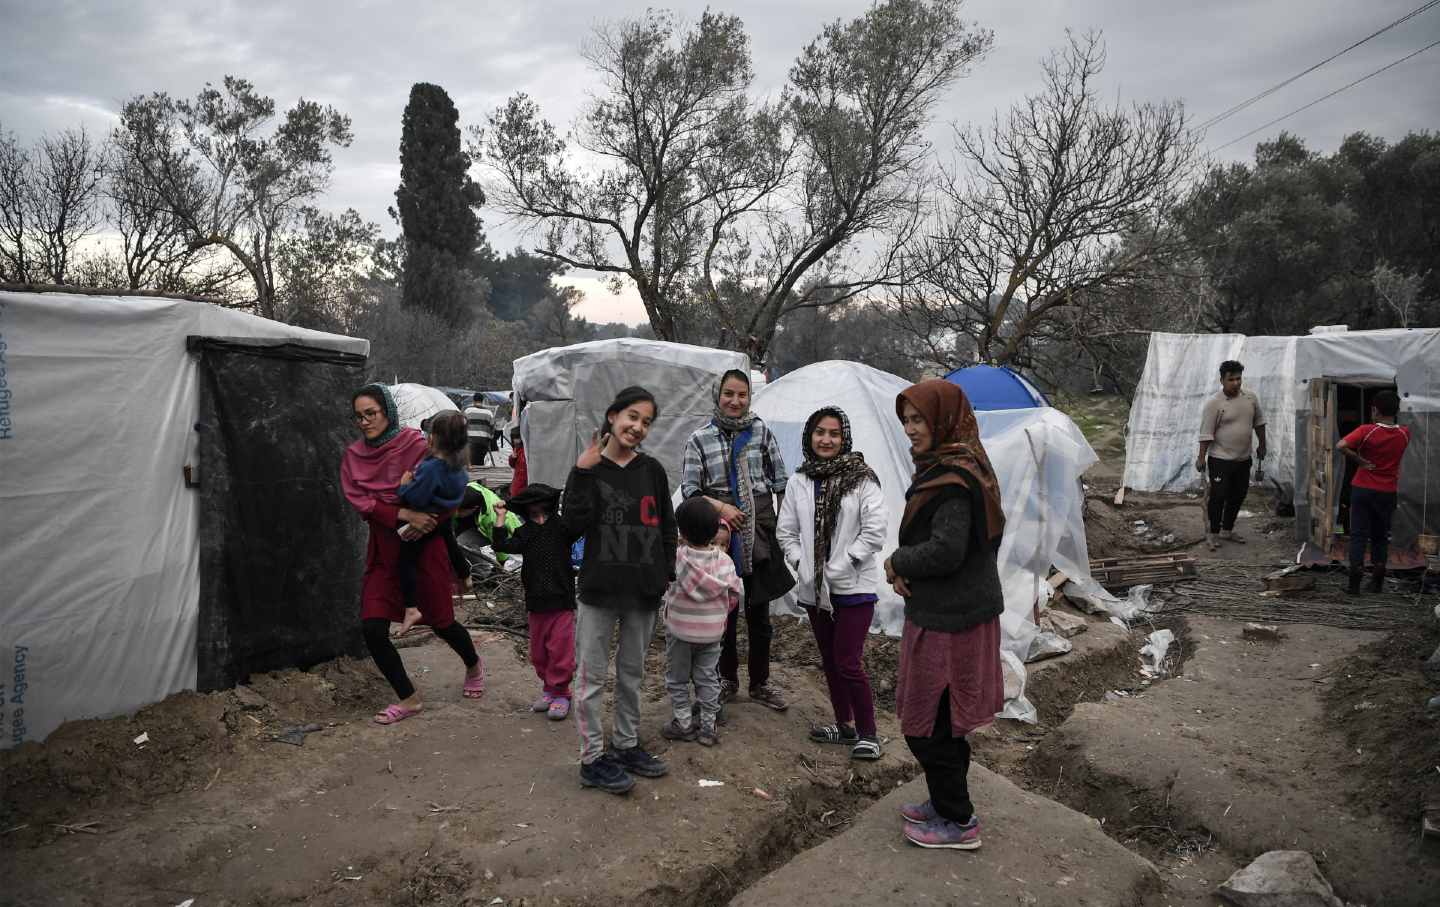 For Refugee Camps, Covid-19 Is a Death Sentence